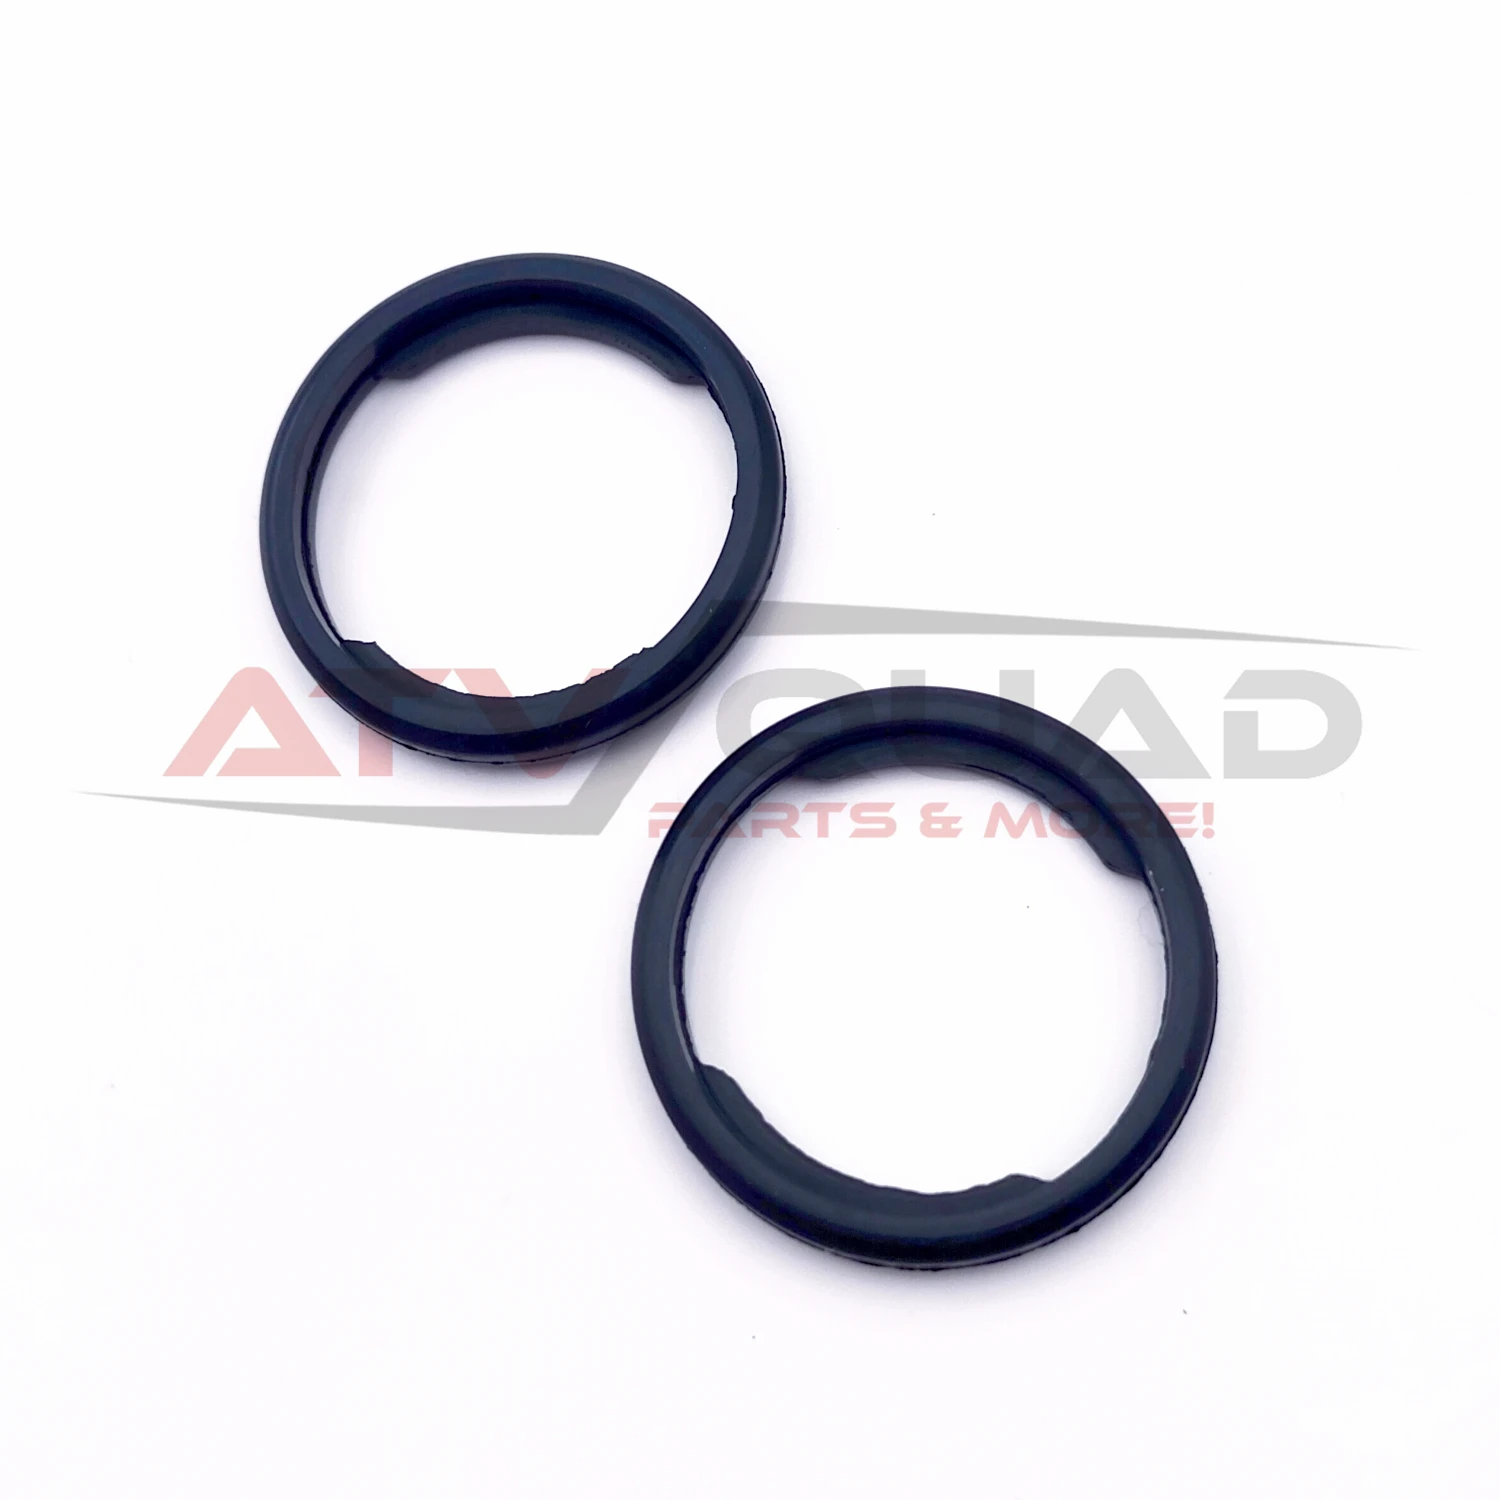 2PCS Thermostat Seal Ring for CFmoto 400 450 500S 520 550 600 Touring 625 800 800EX 800XC 850 X8H.O. 950 950EX 1000 0010-022802 2pcs bamboo material bag handbag handle women purse arc handle coffee natural color with metal d ring diy bag accessories